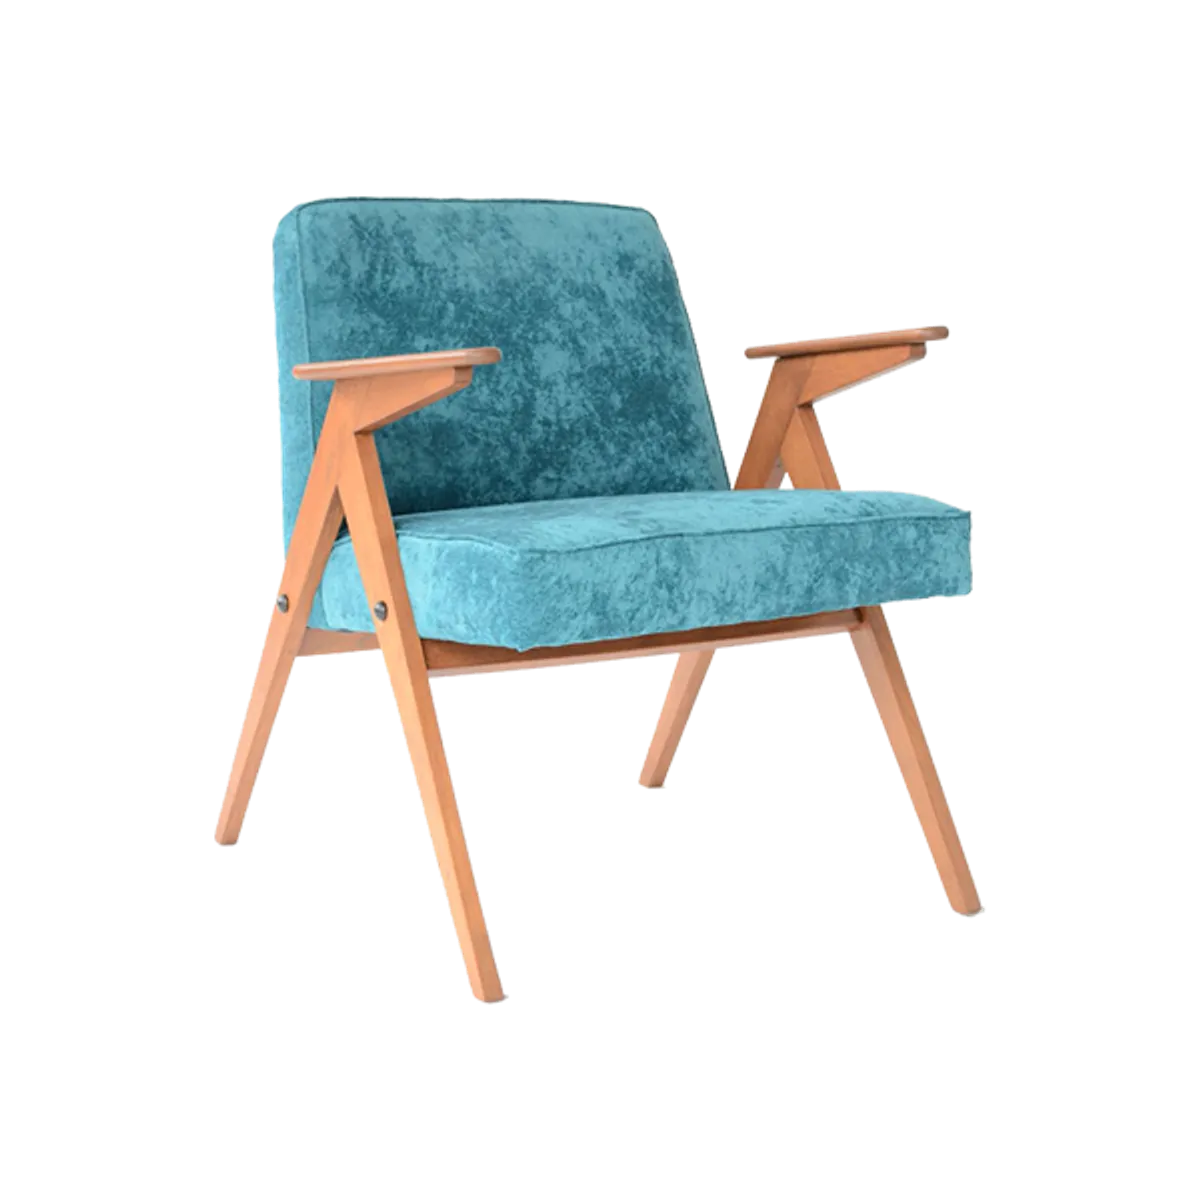 Web Bunny Armchair In Vintage Blue Velvet With Wooden Legs For Hotels And Offices By Insideoutcontracts 003